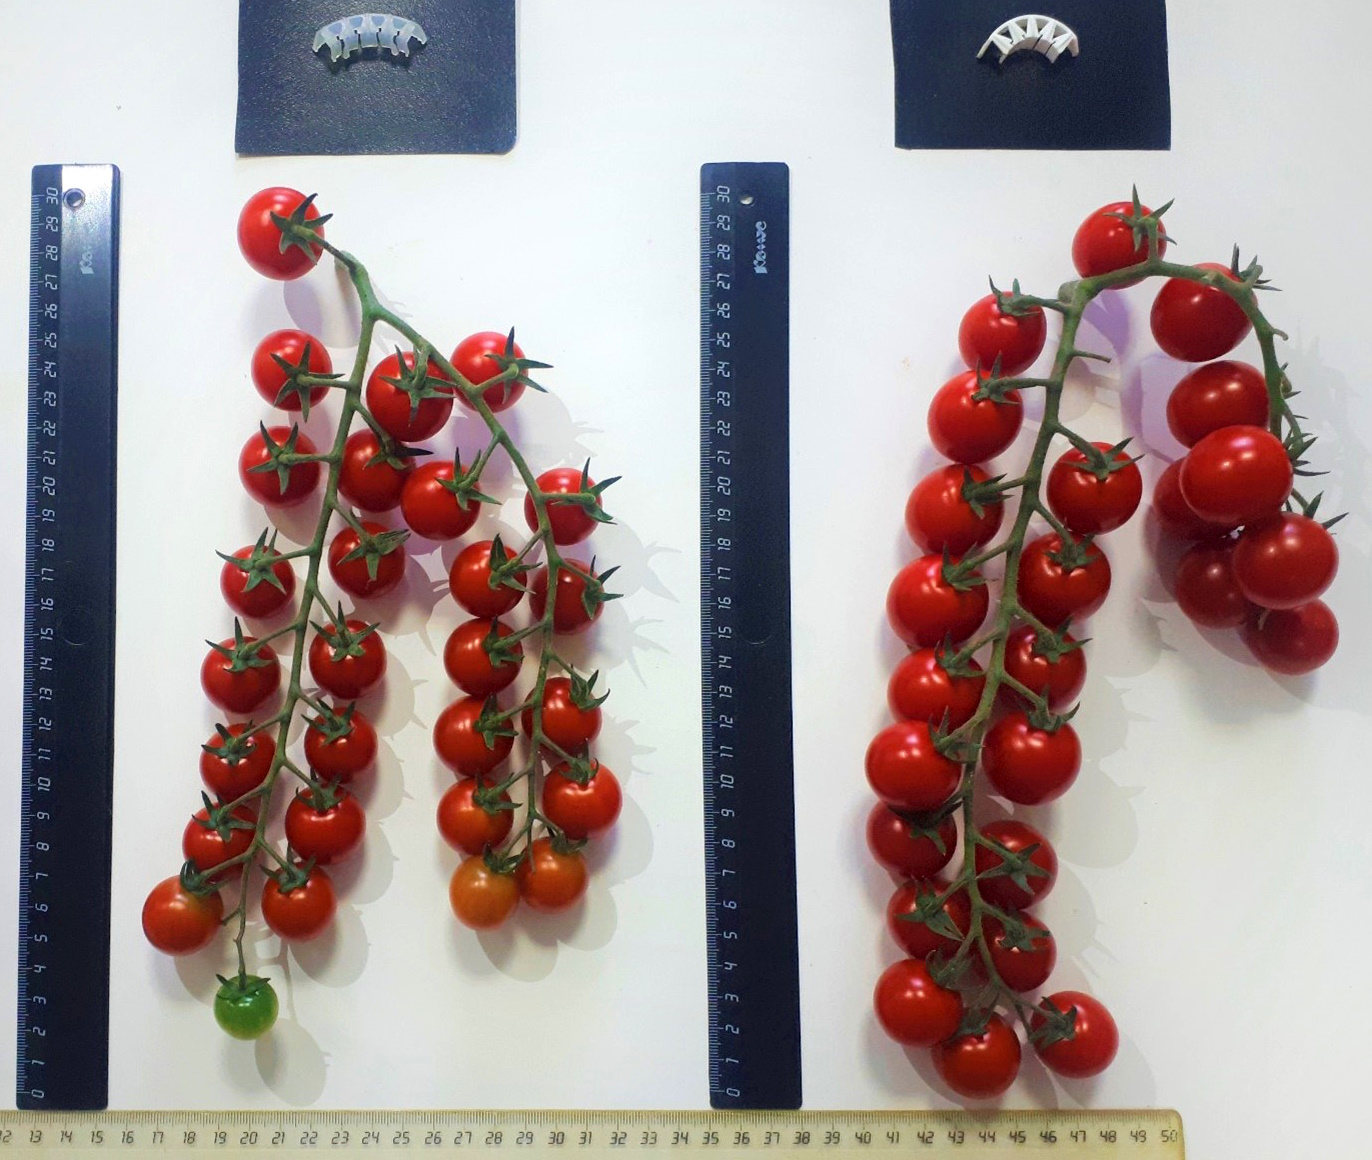 CULTIVATING CHERRY TOMATOES